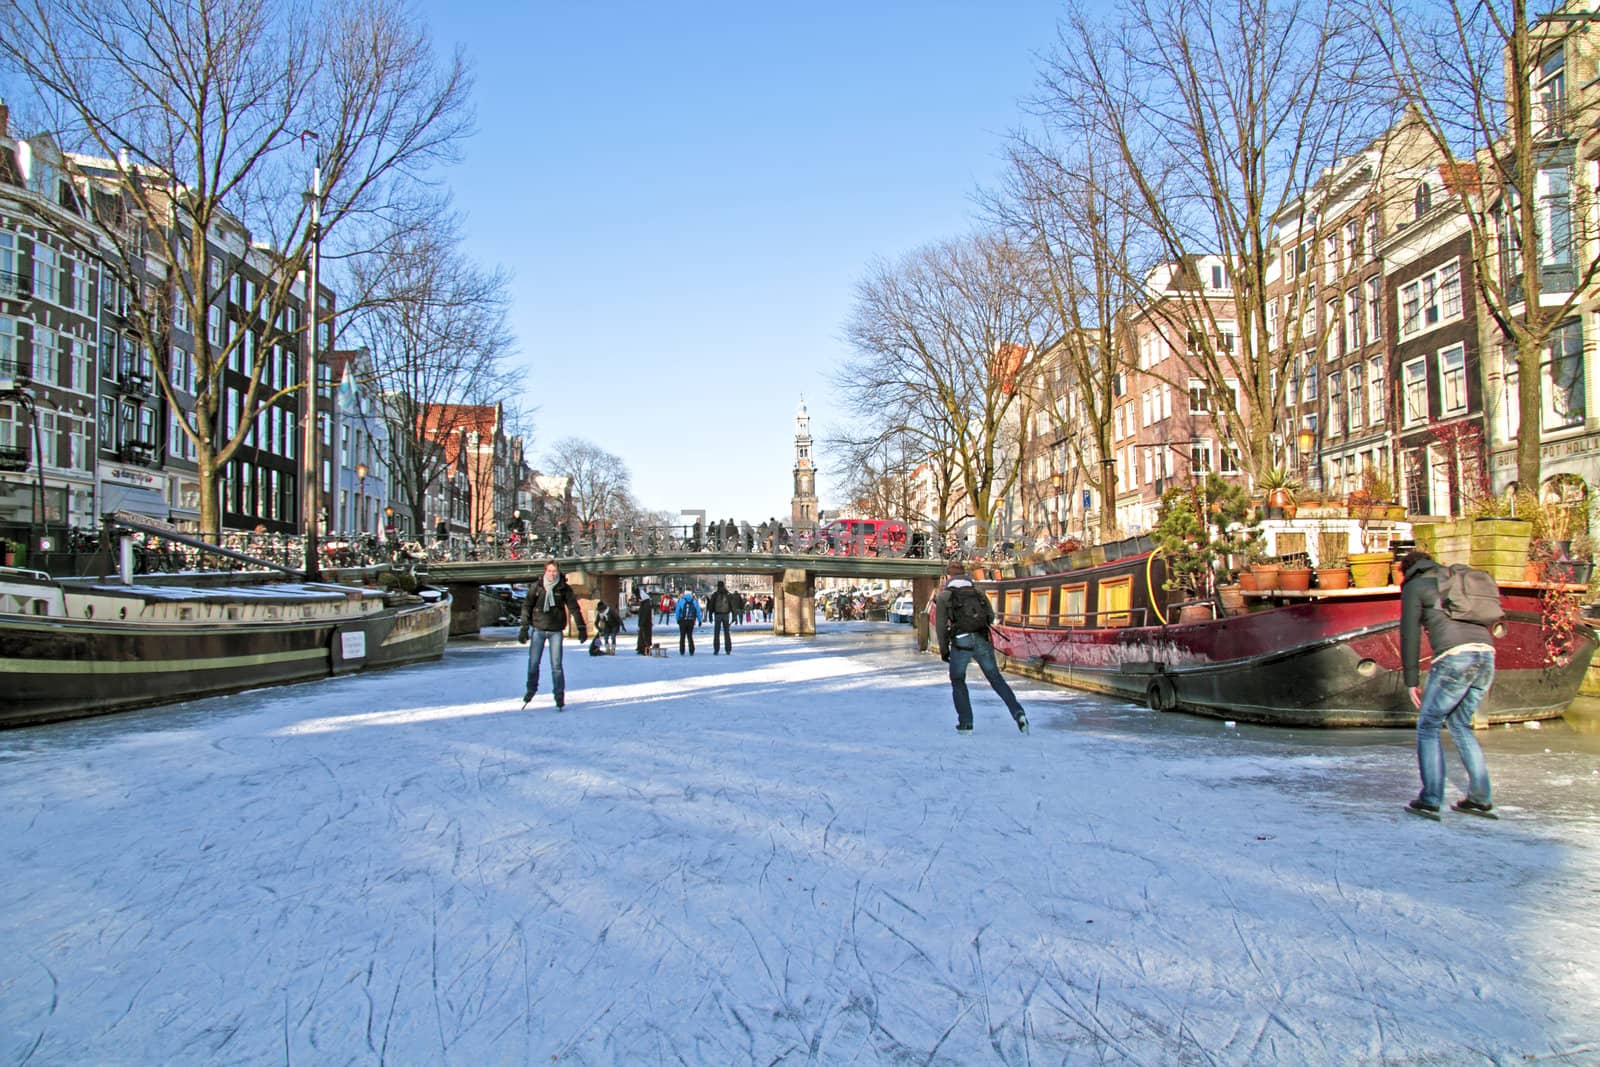 Ice skating on the canals in Amsterdam the Netherlands in winter